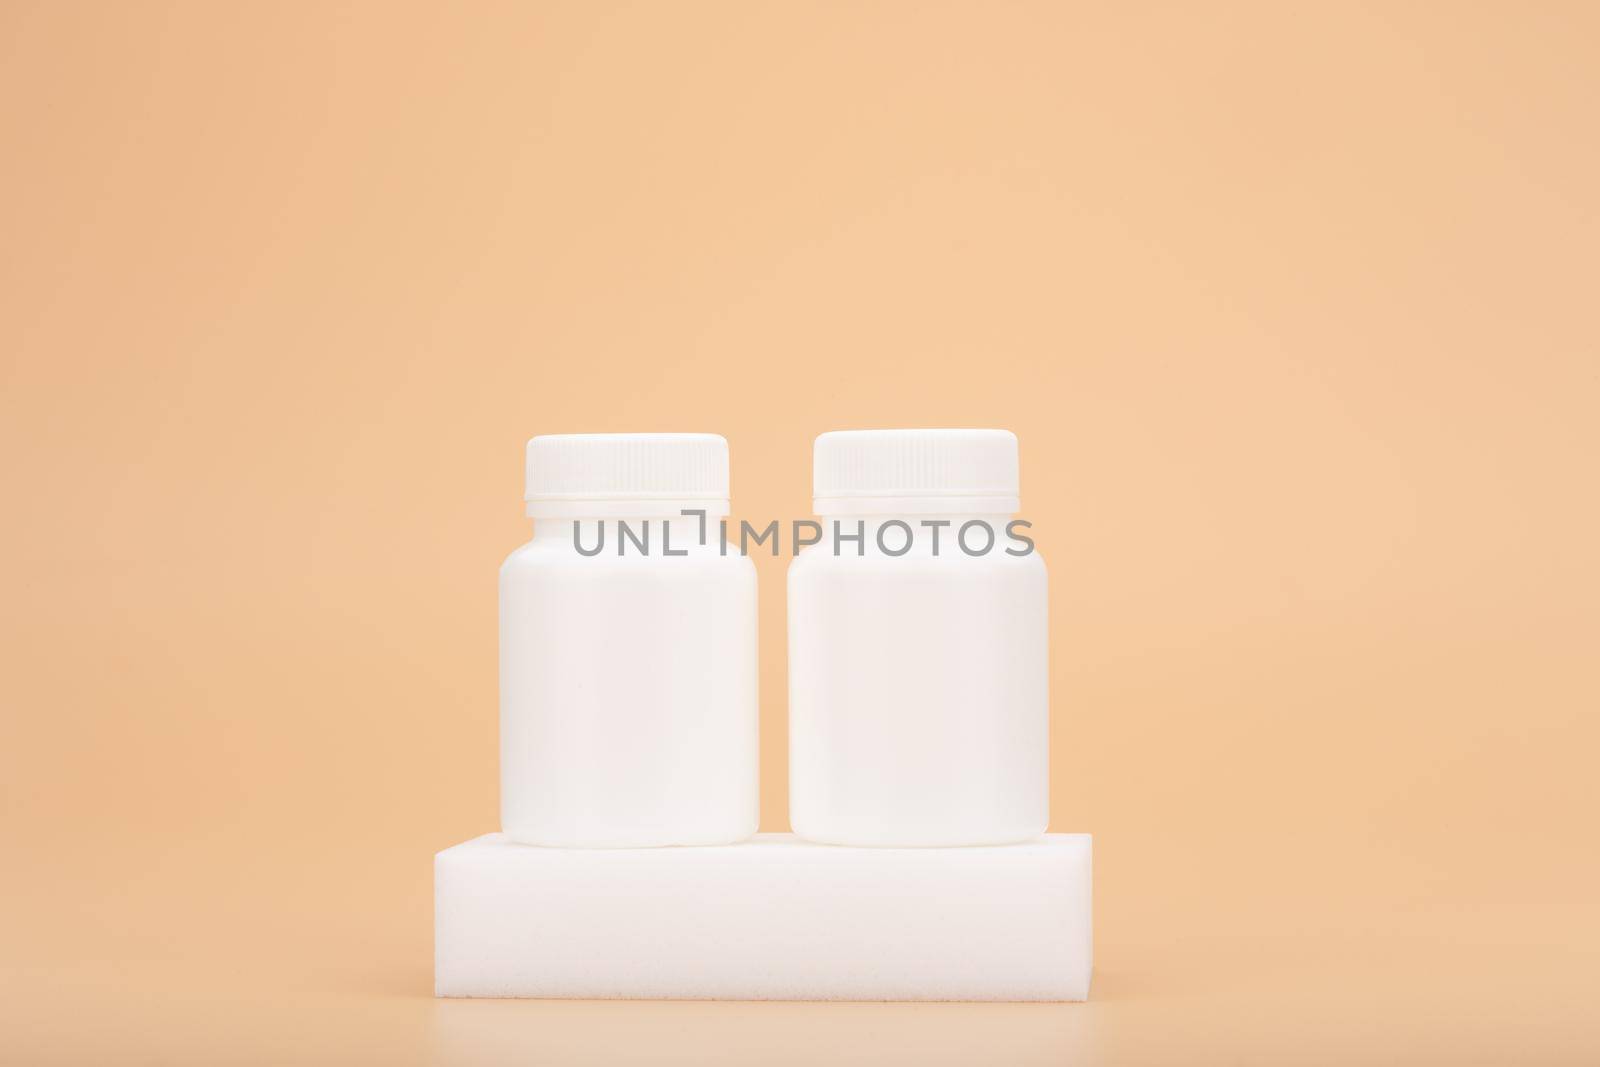 Two white medication unbranded bottles on white podium against beige background. Concept of vitamins, supplements, healthy lifestyle and wellbeing